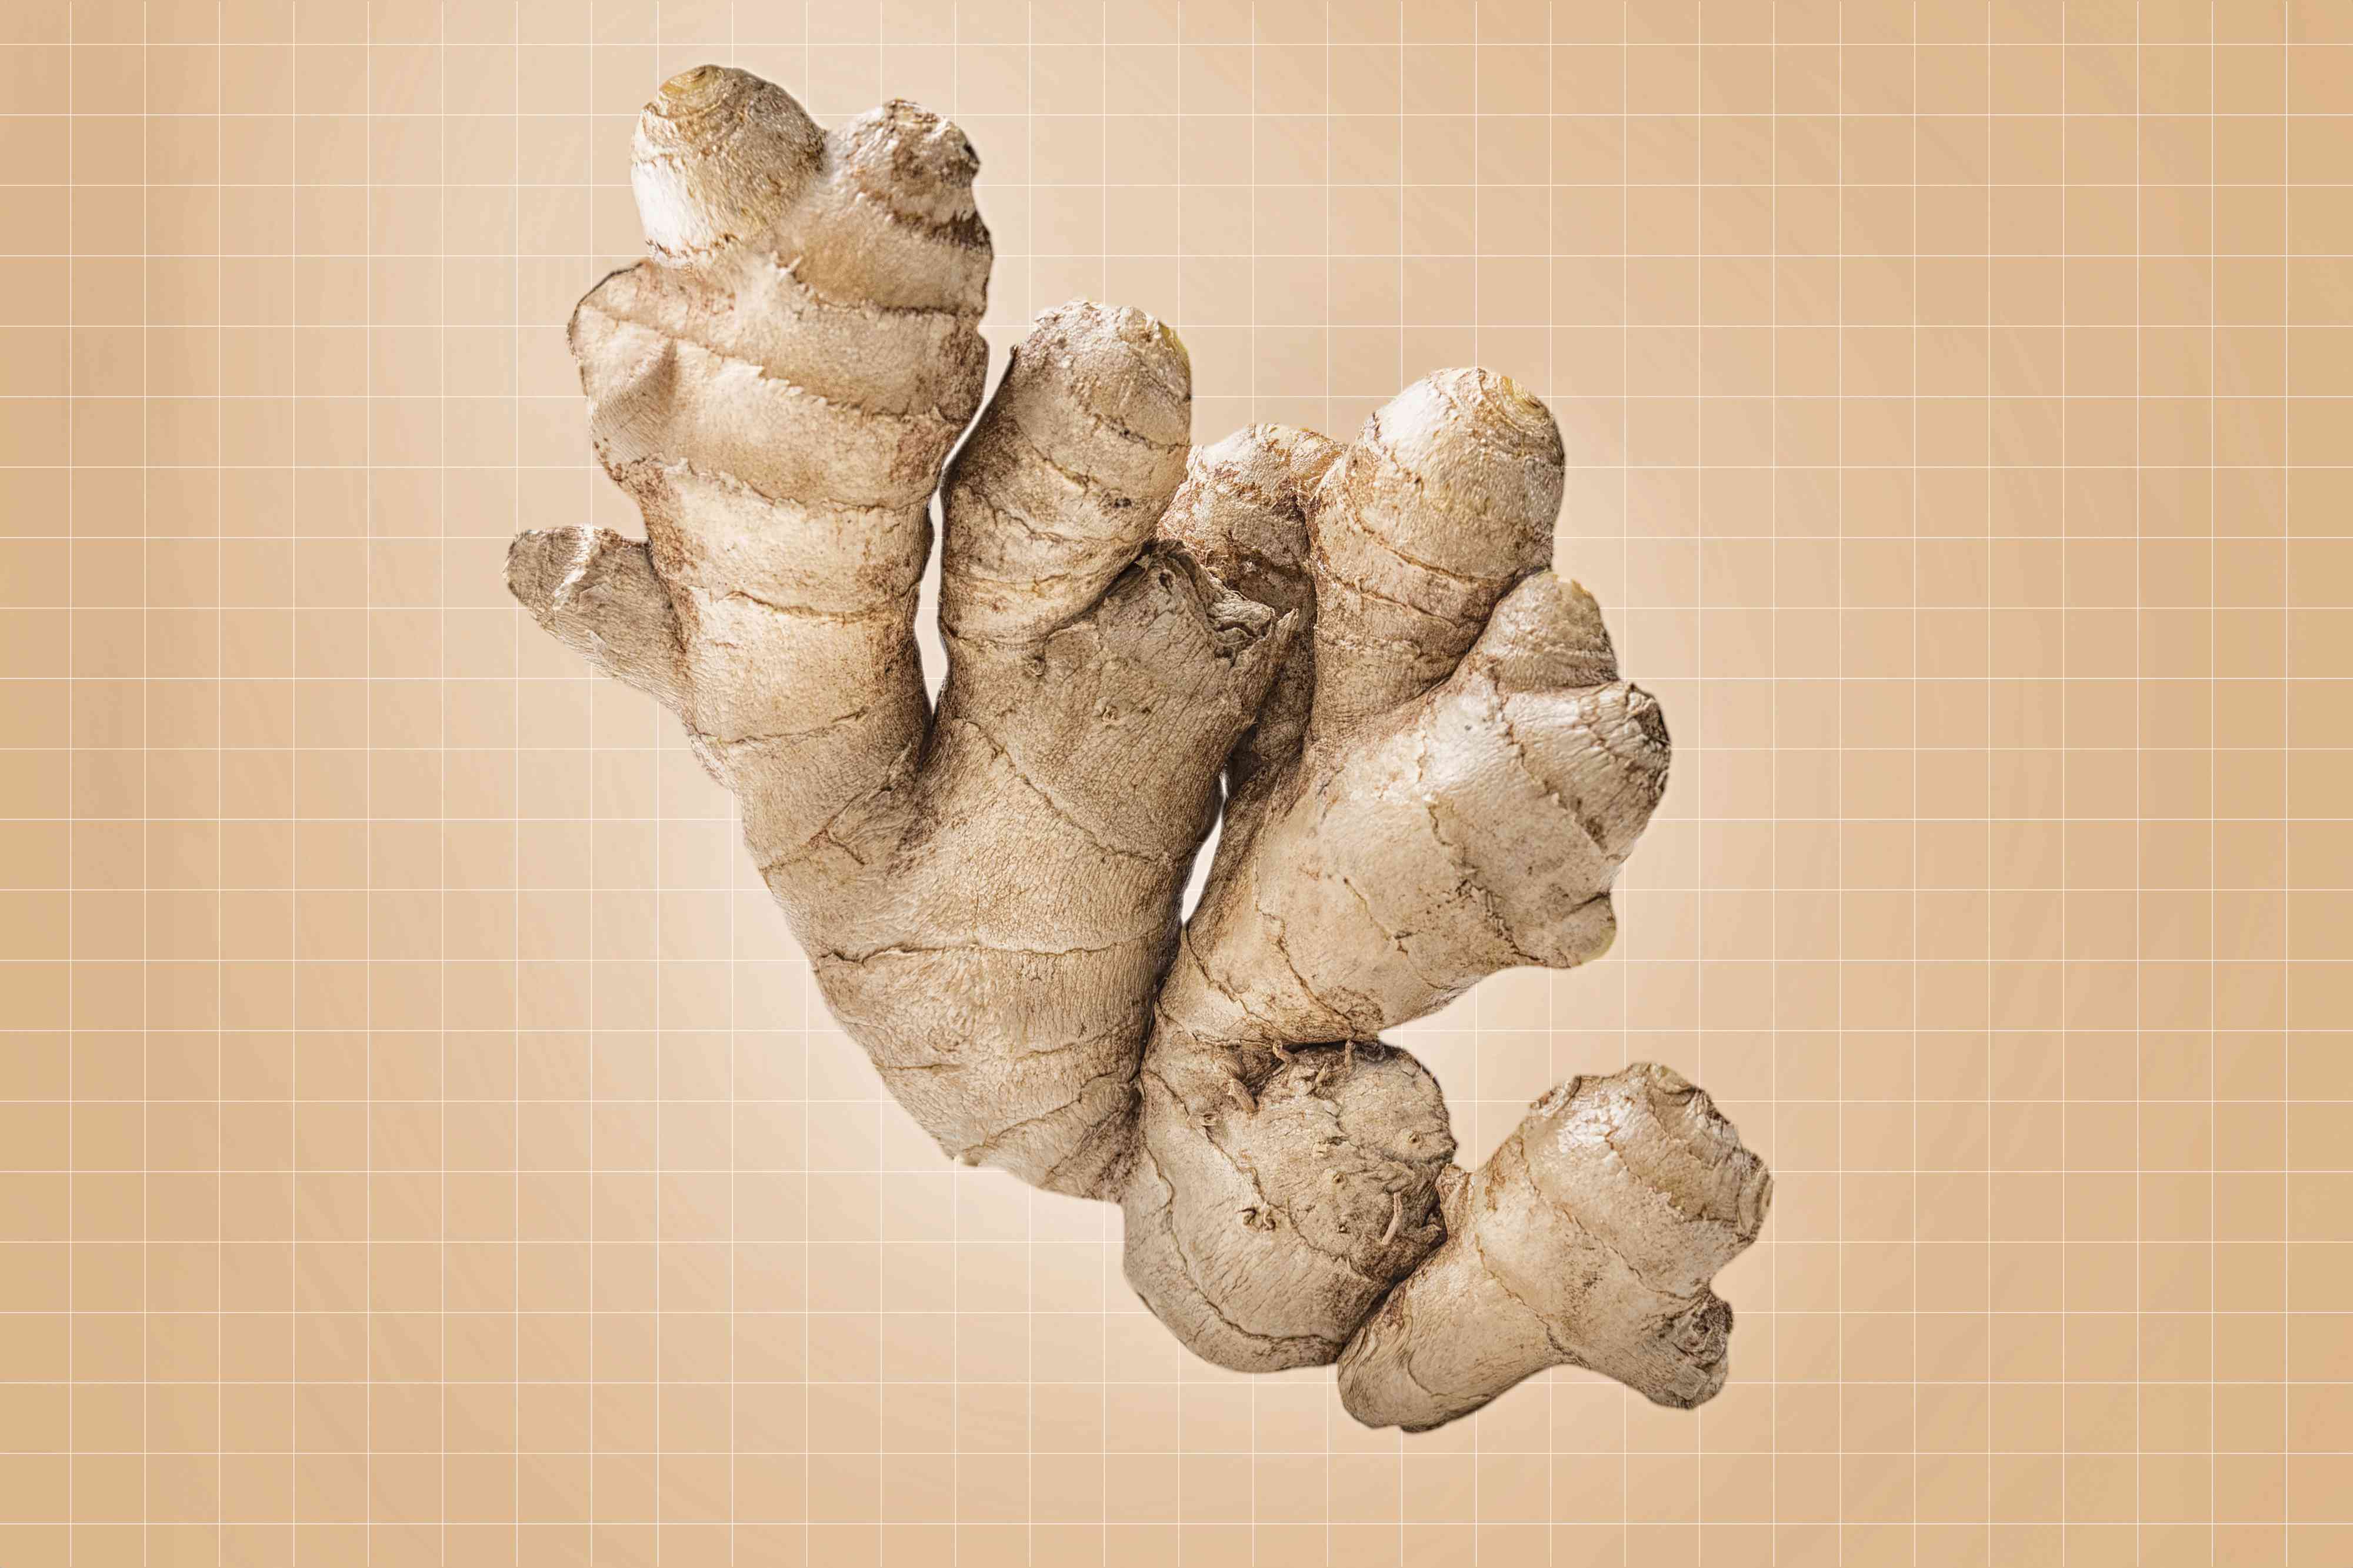 4 ways ginger can affect your medication, according to health experts